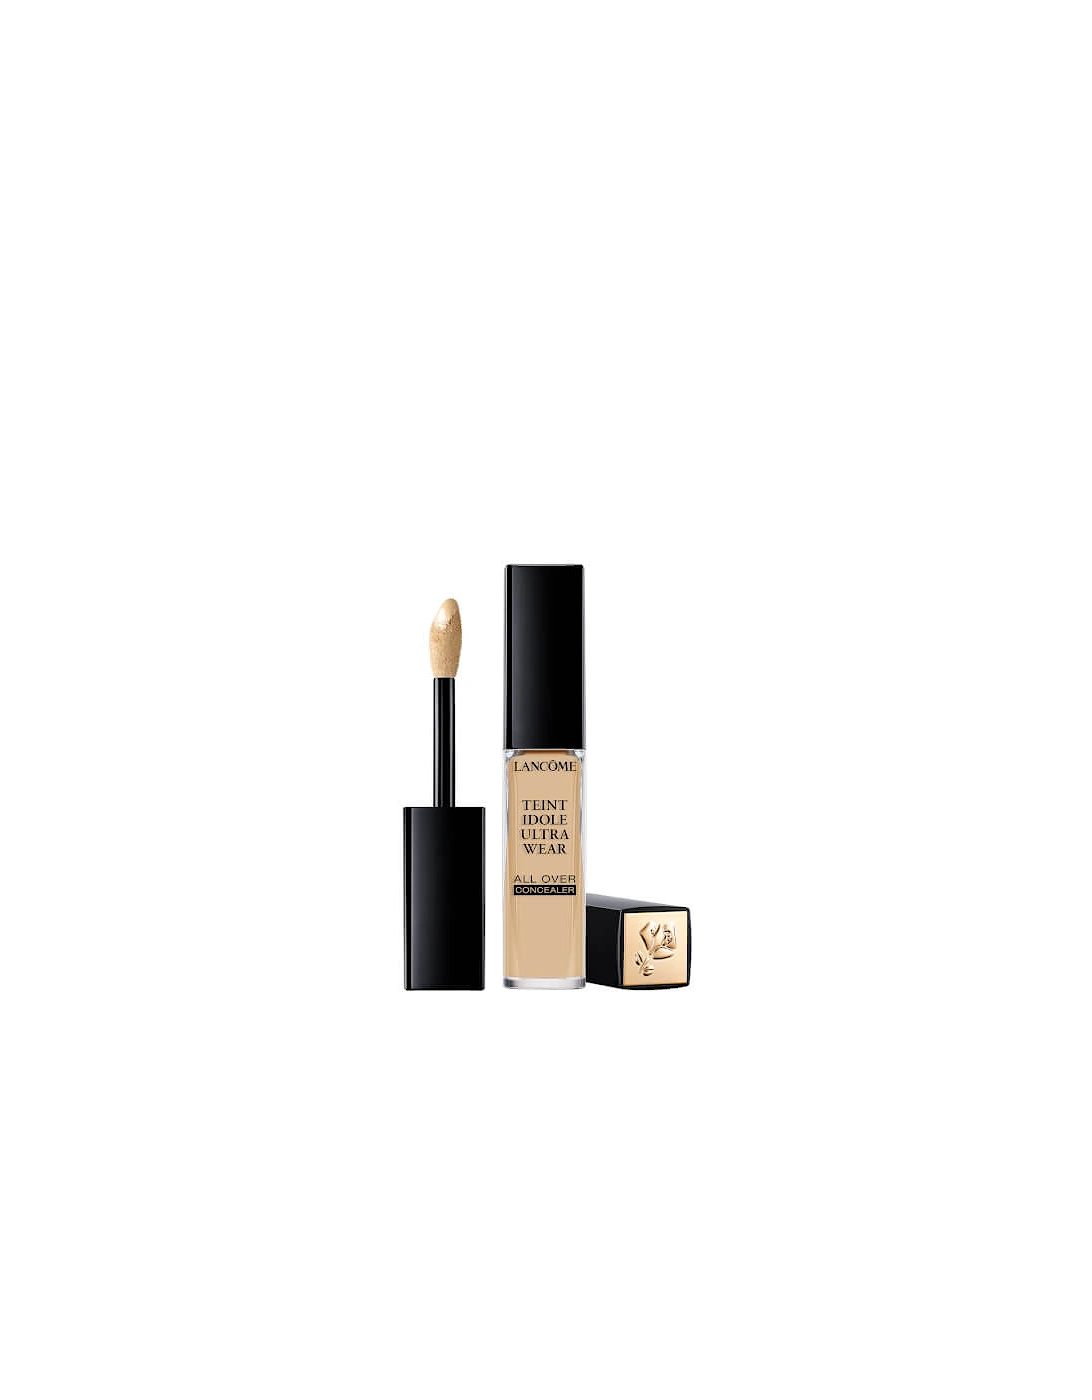 Teint Idole Ultra Wear All Over Concealer - 110 Ivoire C 010, 2 of 1